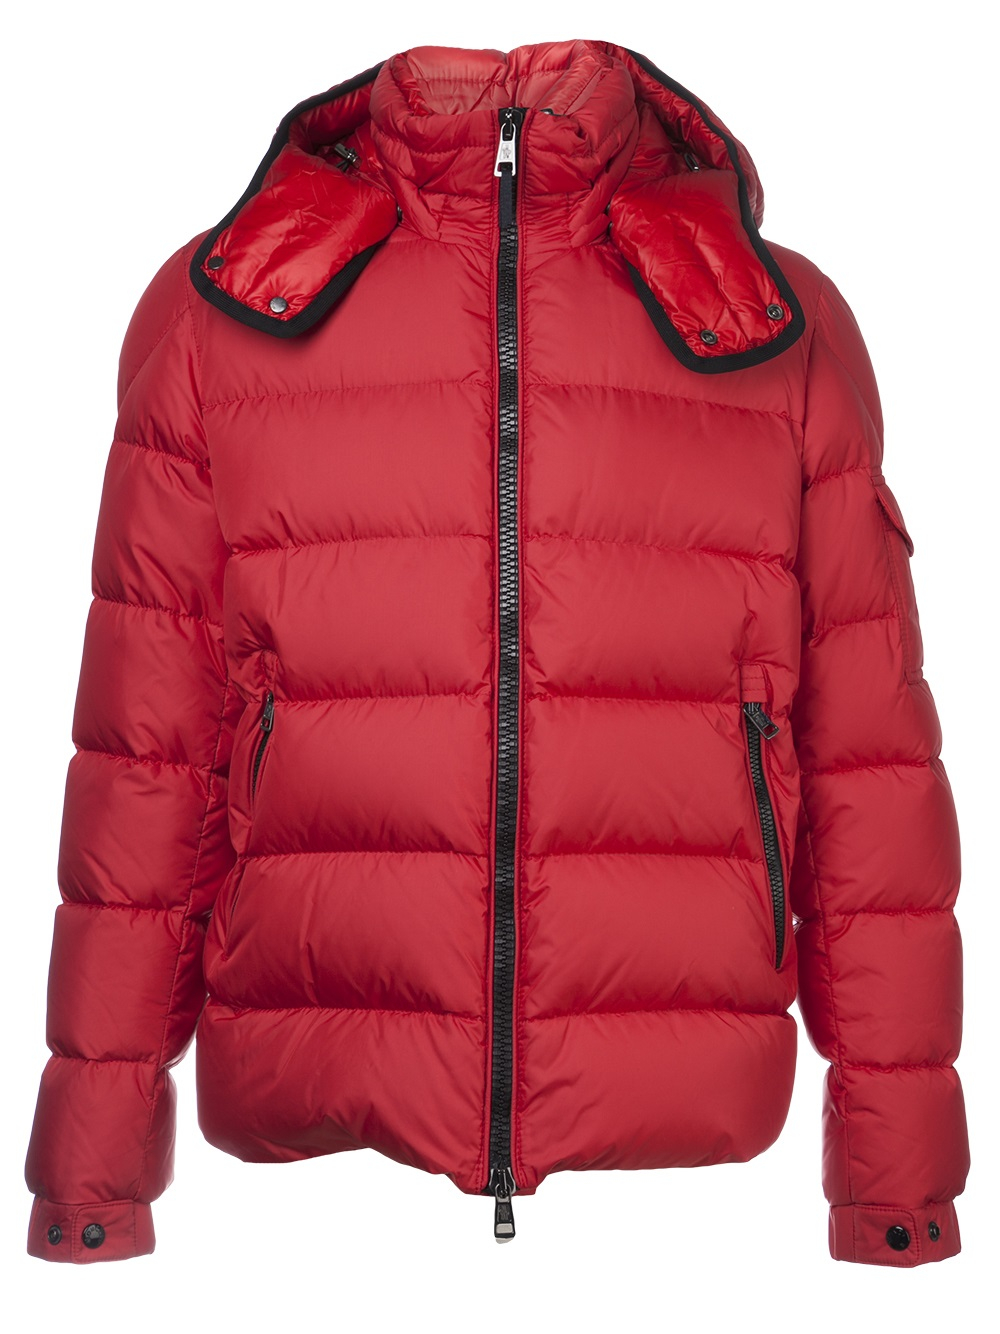 Lyst - Moncler Puffer Coat in Red for Men